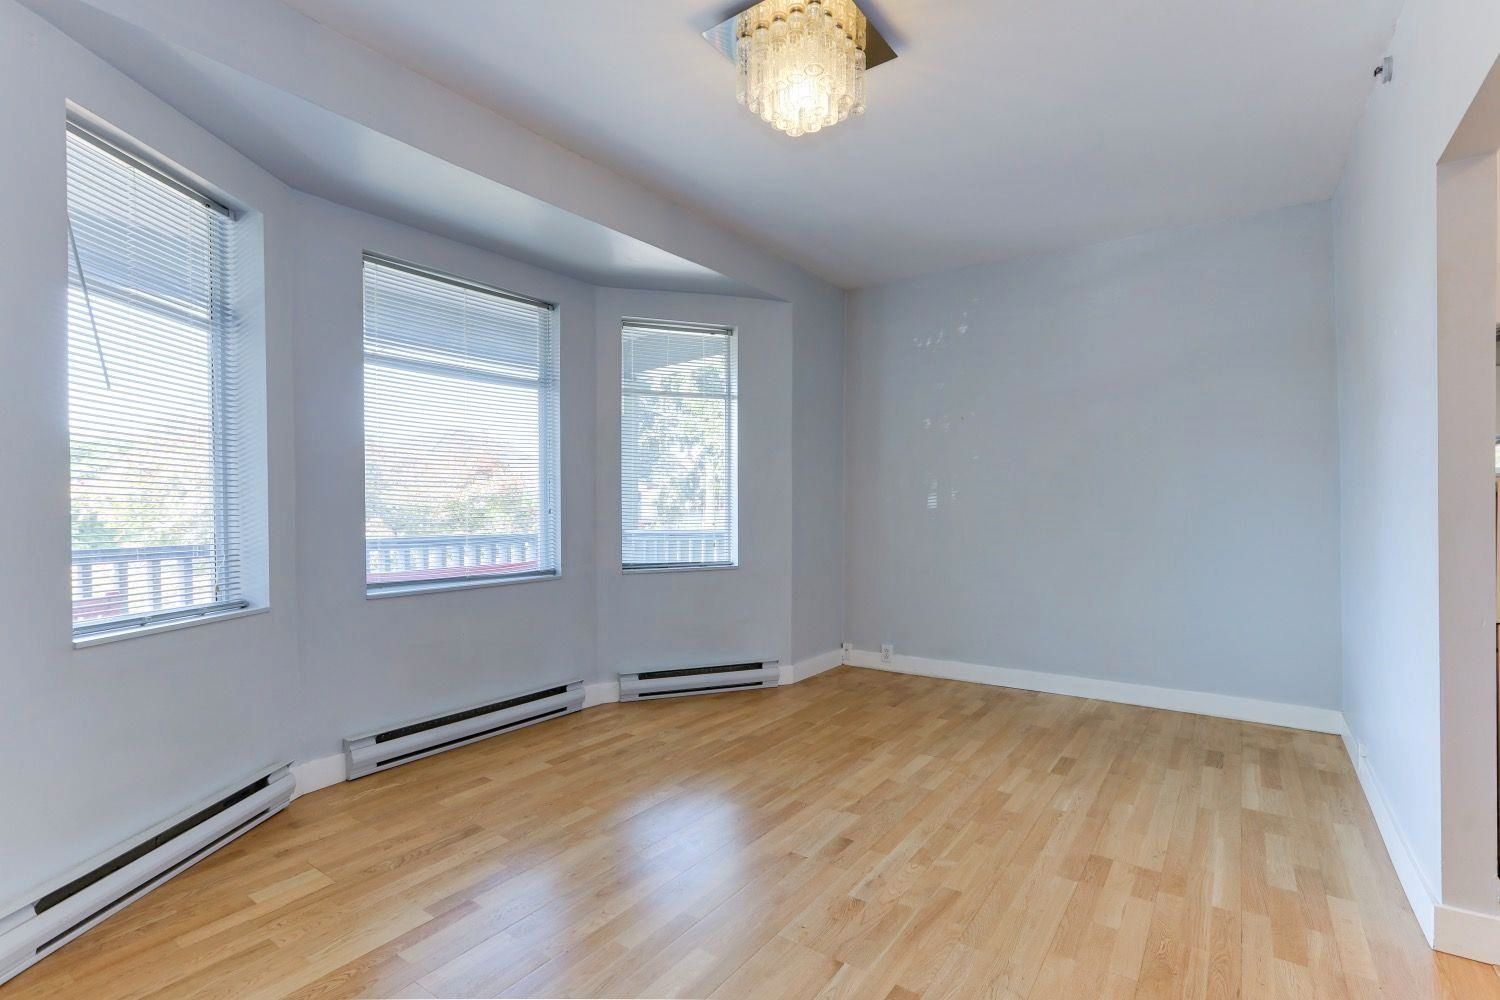 Photo 23: Photos: 6106 CHESTER STREET in Vancouver: Fraser VE Multifamily for sale (Vancouver East)  : MLS®# R2613965